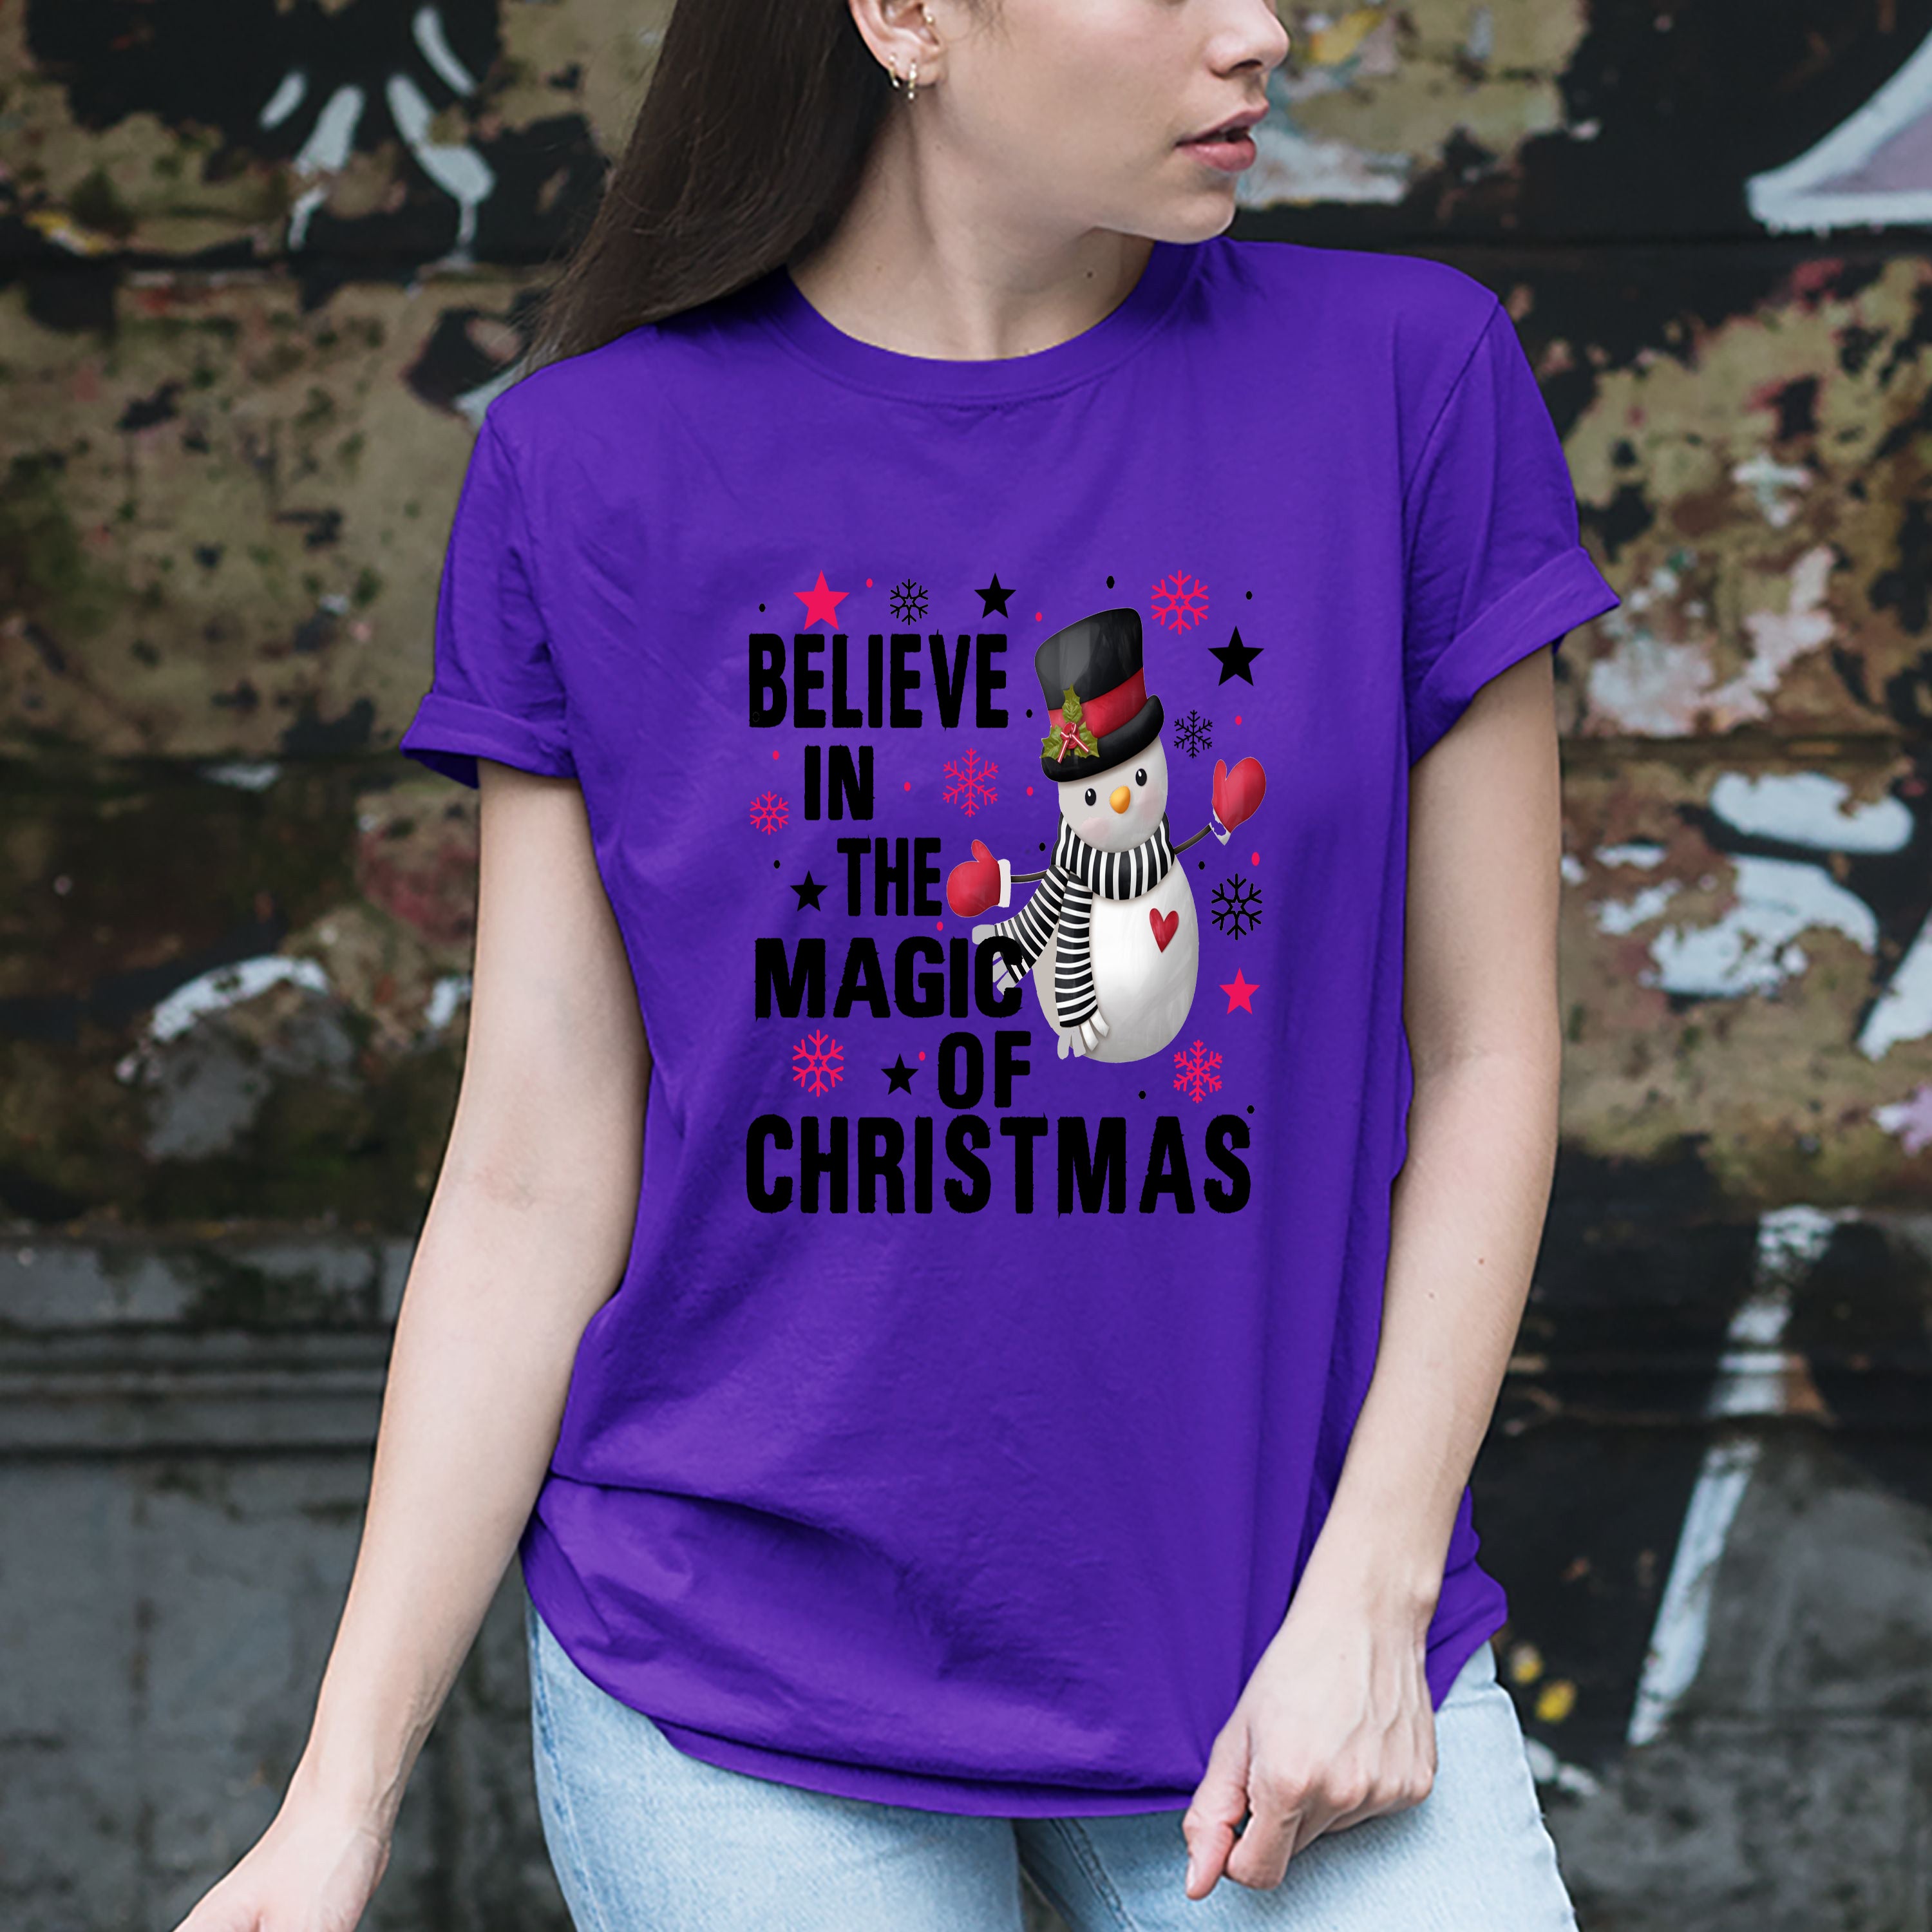 'BELIEVE IN THE MAGIC OF CHRISTMAS''